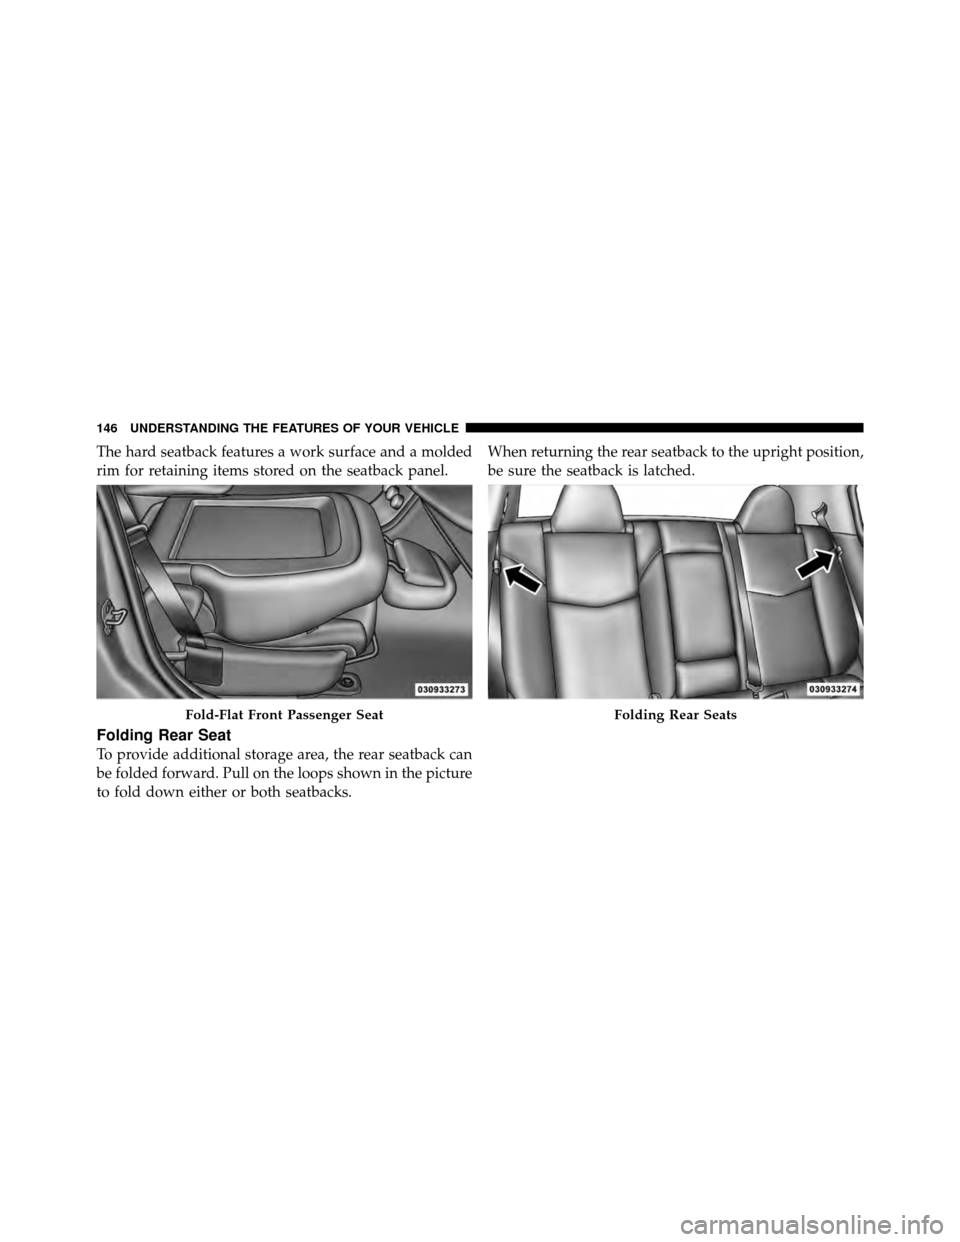 CHRYSLER 200 2012 1.G Owners Manual The hard seatback features a work surface and a molded
rim for retaining items stored on the seatback panel.
Folding Rear Seat
To provide additional storage area, the rear seatback can
be folded forwa